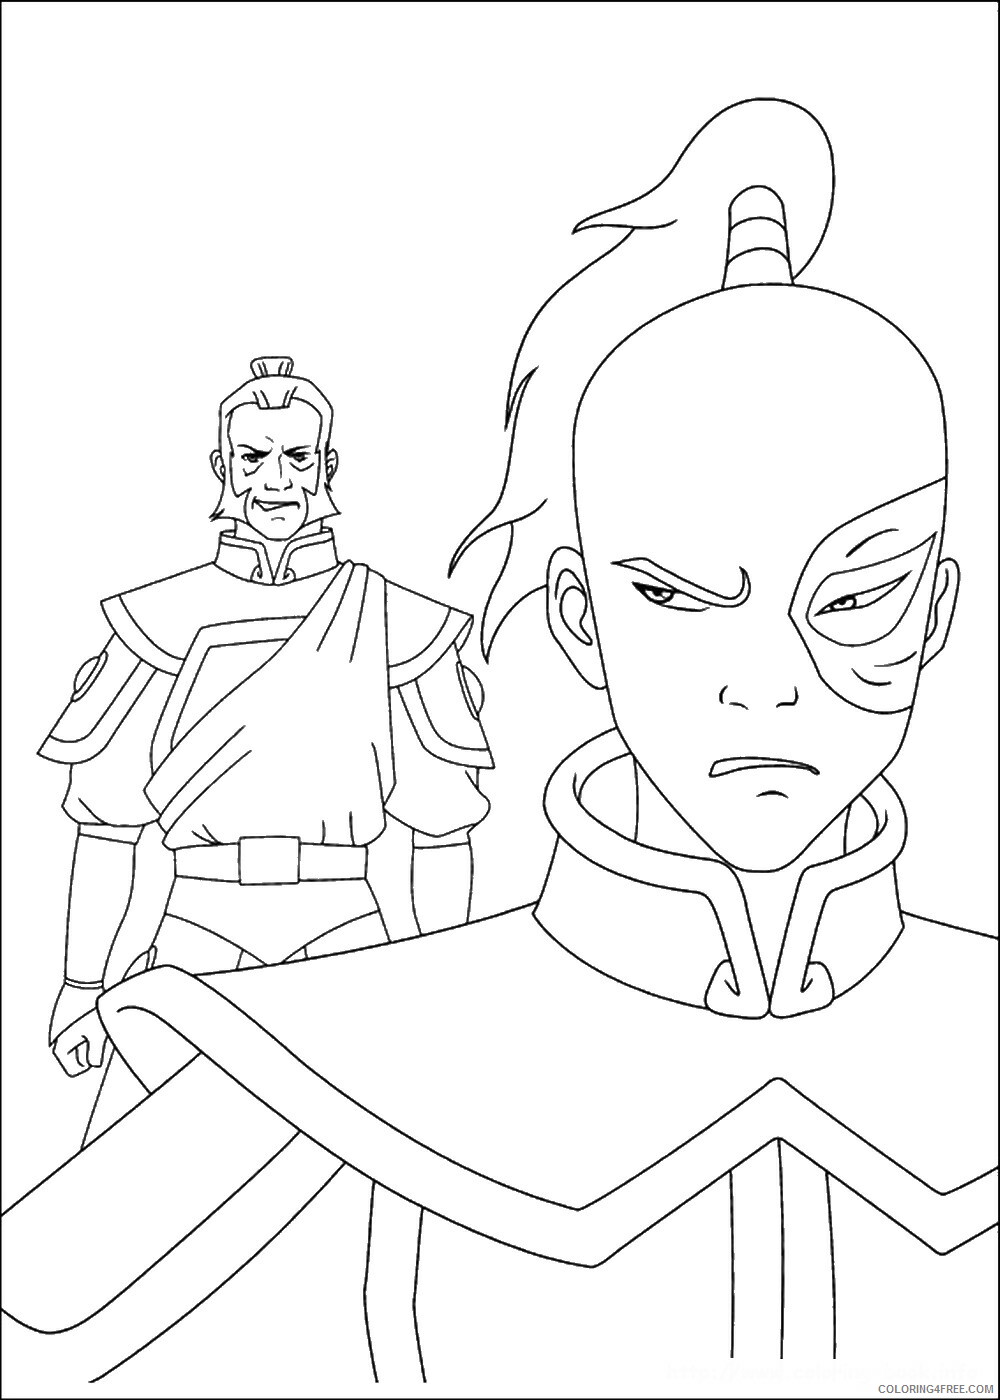 Avatar the Last Airbender Coloring Pages TV Film avatar_cl131 Printable 2020 00289 Coloring4free